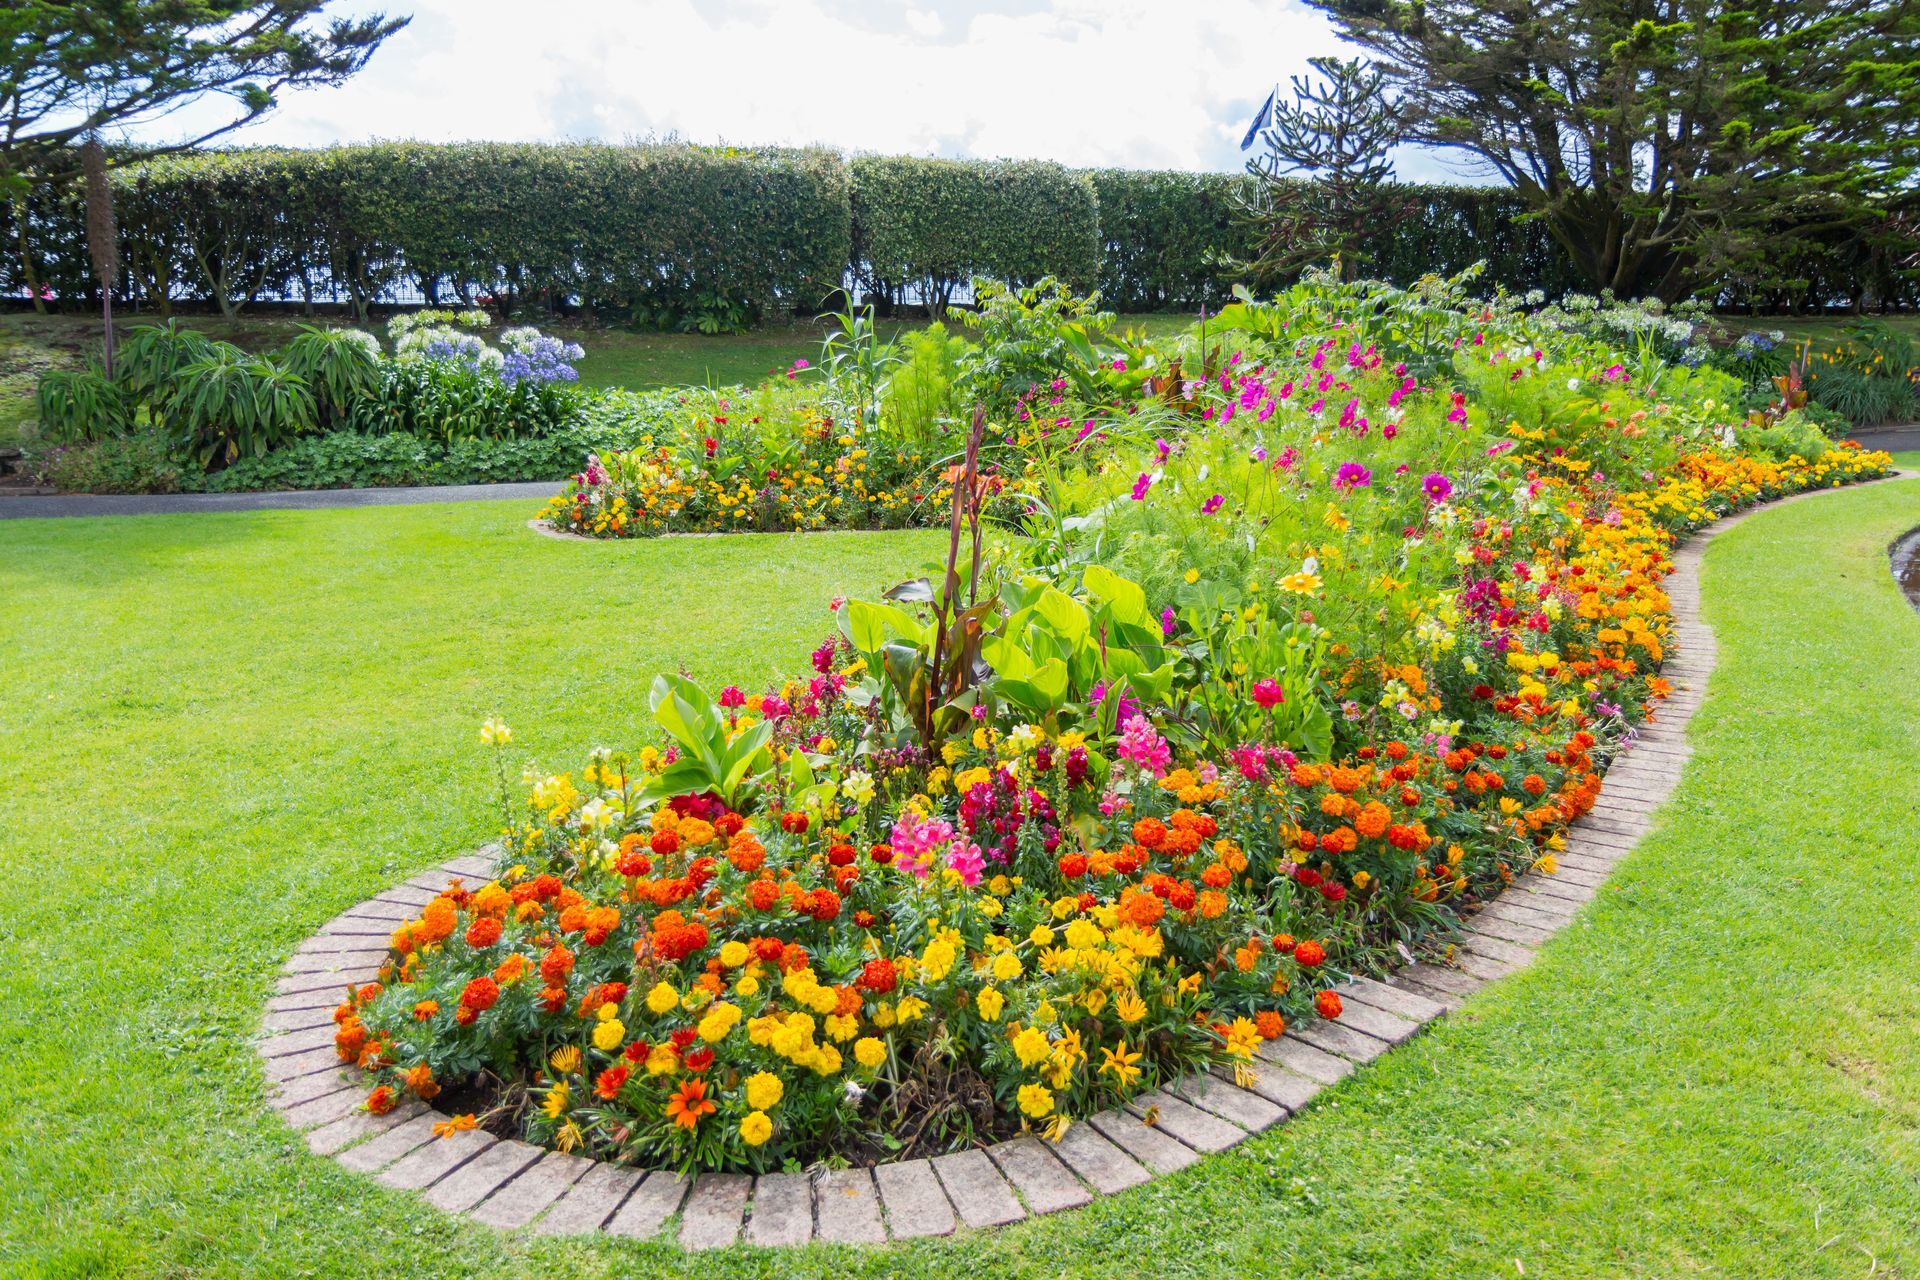 Colorful garden blooms and lush green plants in full bloom during a sunny summer day.